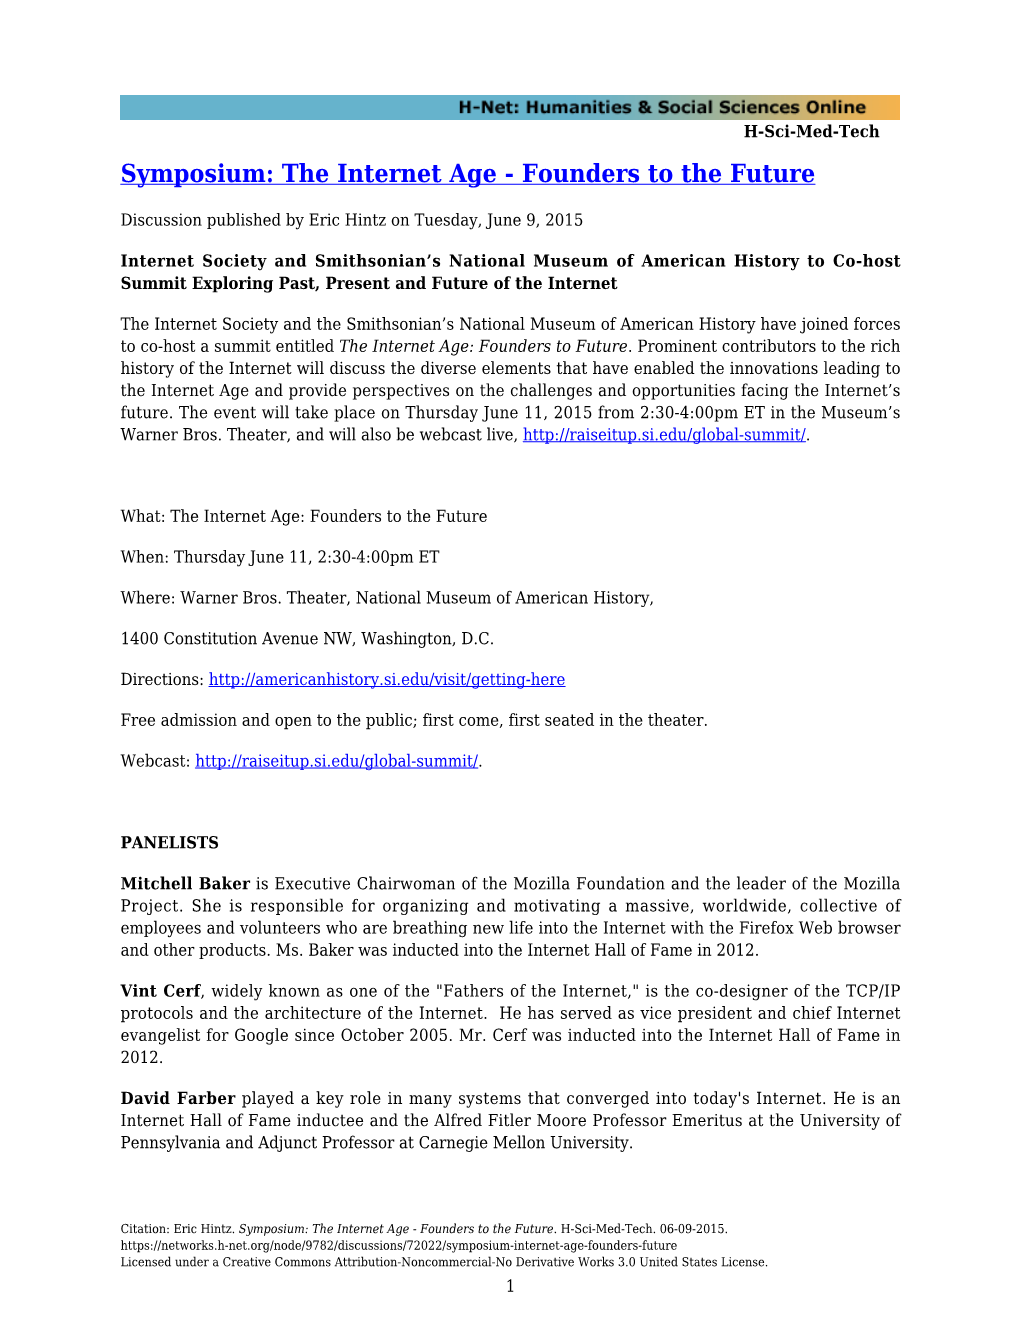 Symposium: the Internet Age - Founders to the Future